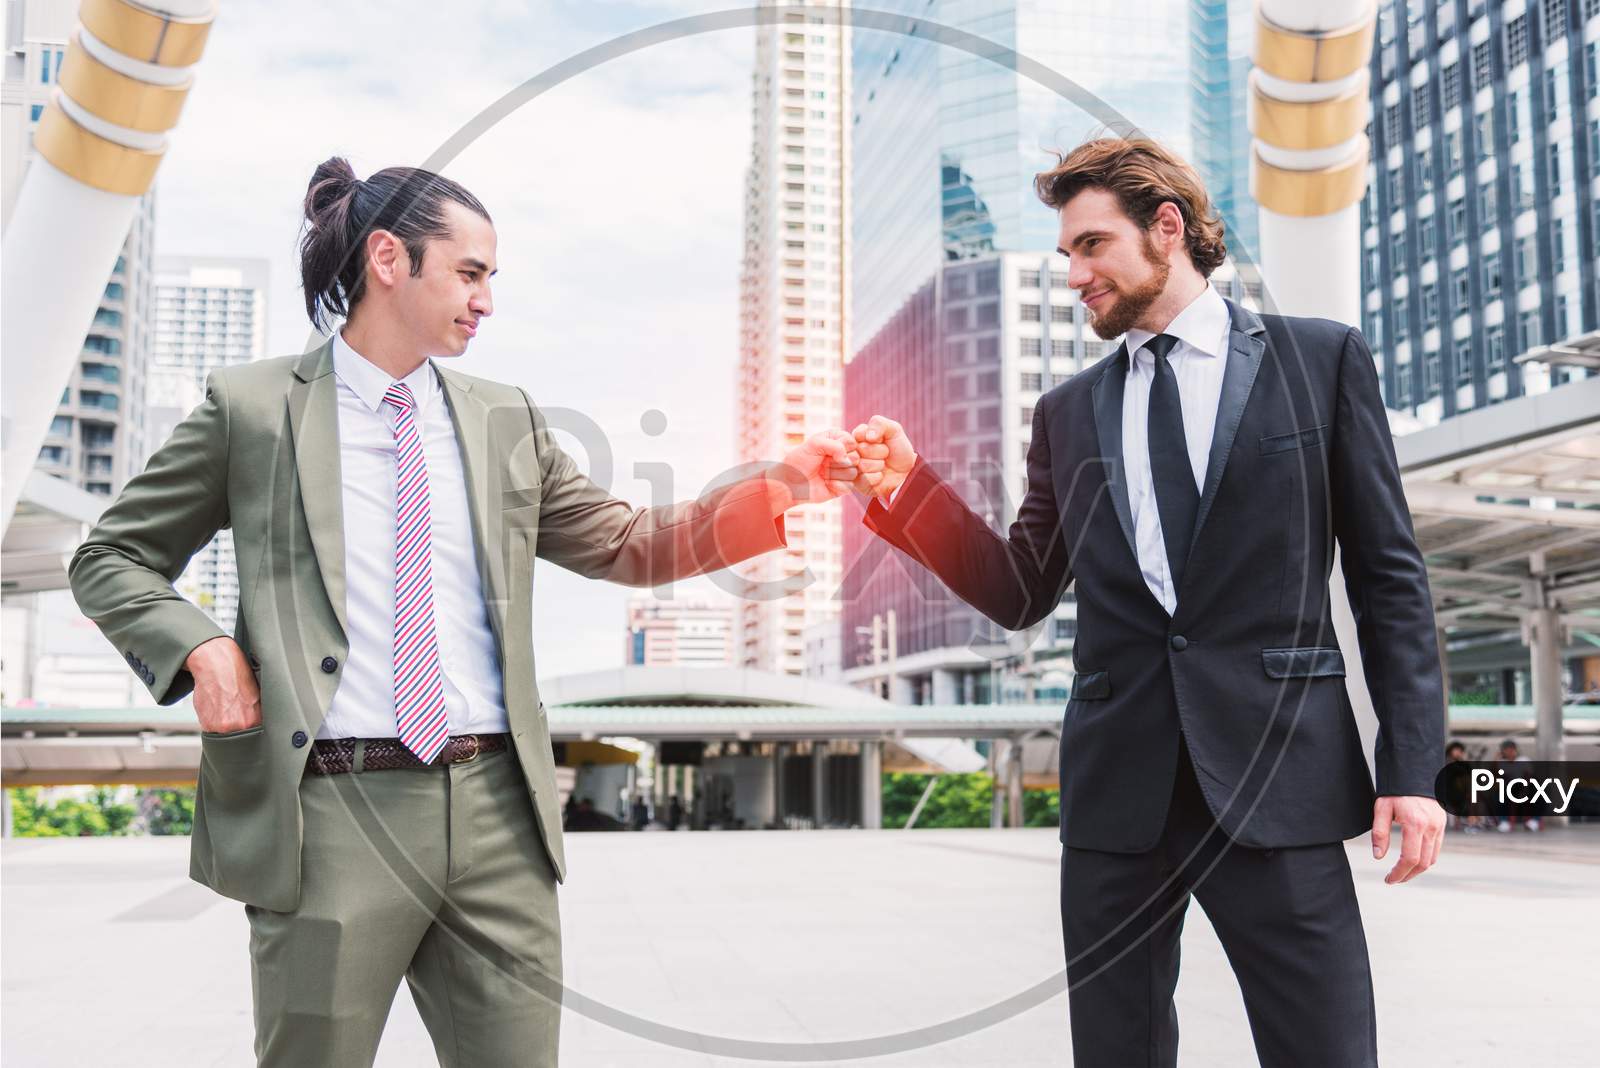 Fist Bump Or Knuckle Bump Between Two Businessmen Agreement At Outdoor In The City, Business Cooperation And Participation Concept, Power Of Teamwork Or Teammate